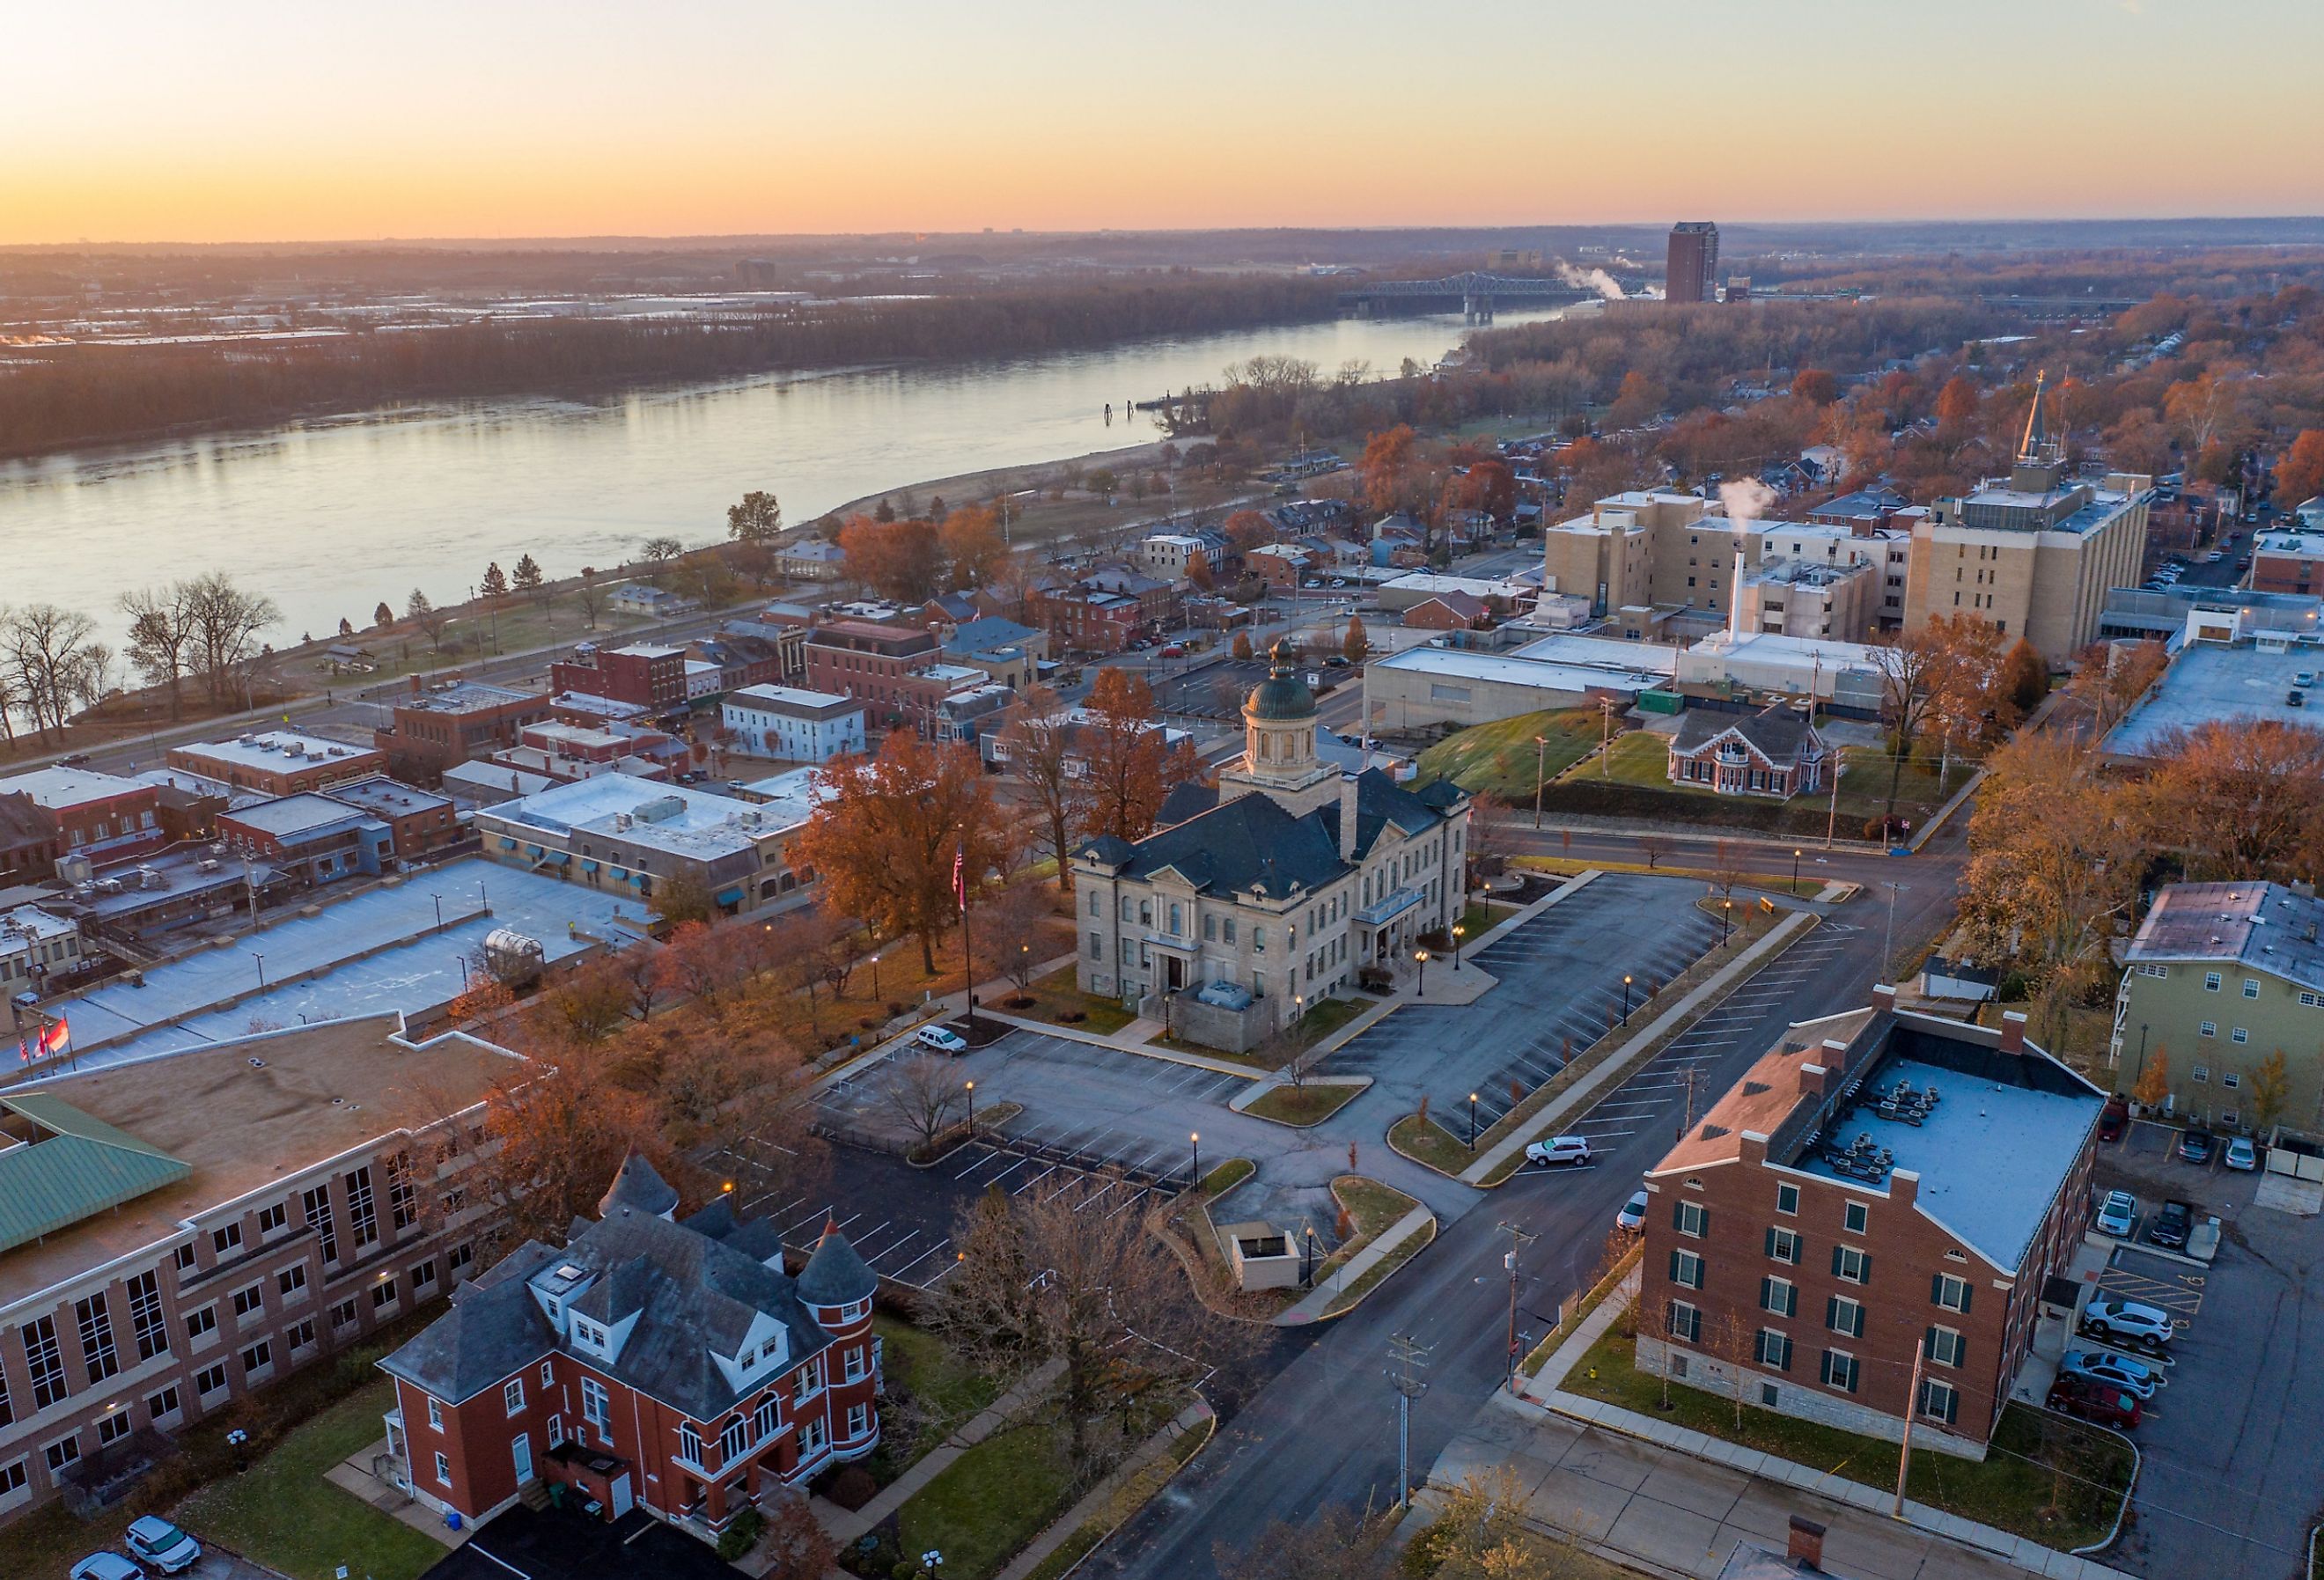 Historic downtown St Charles. Image credit RN Photo Midwest via Shutterstock